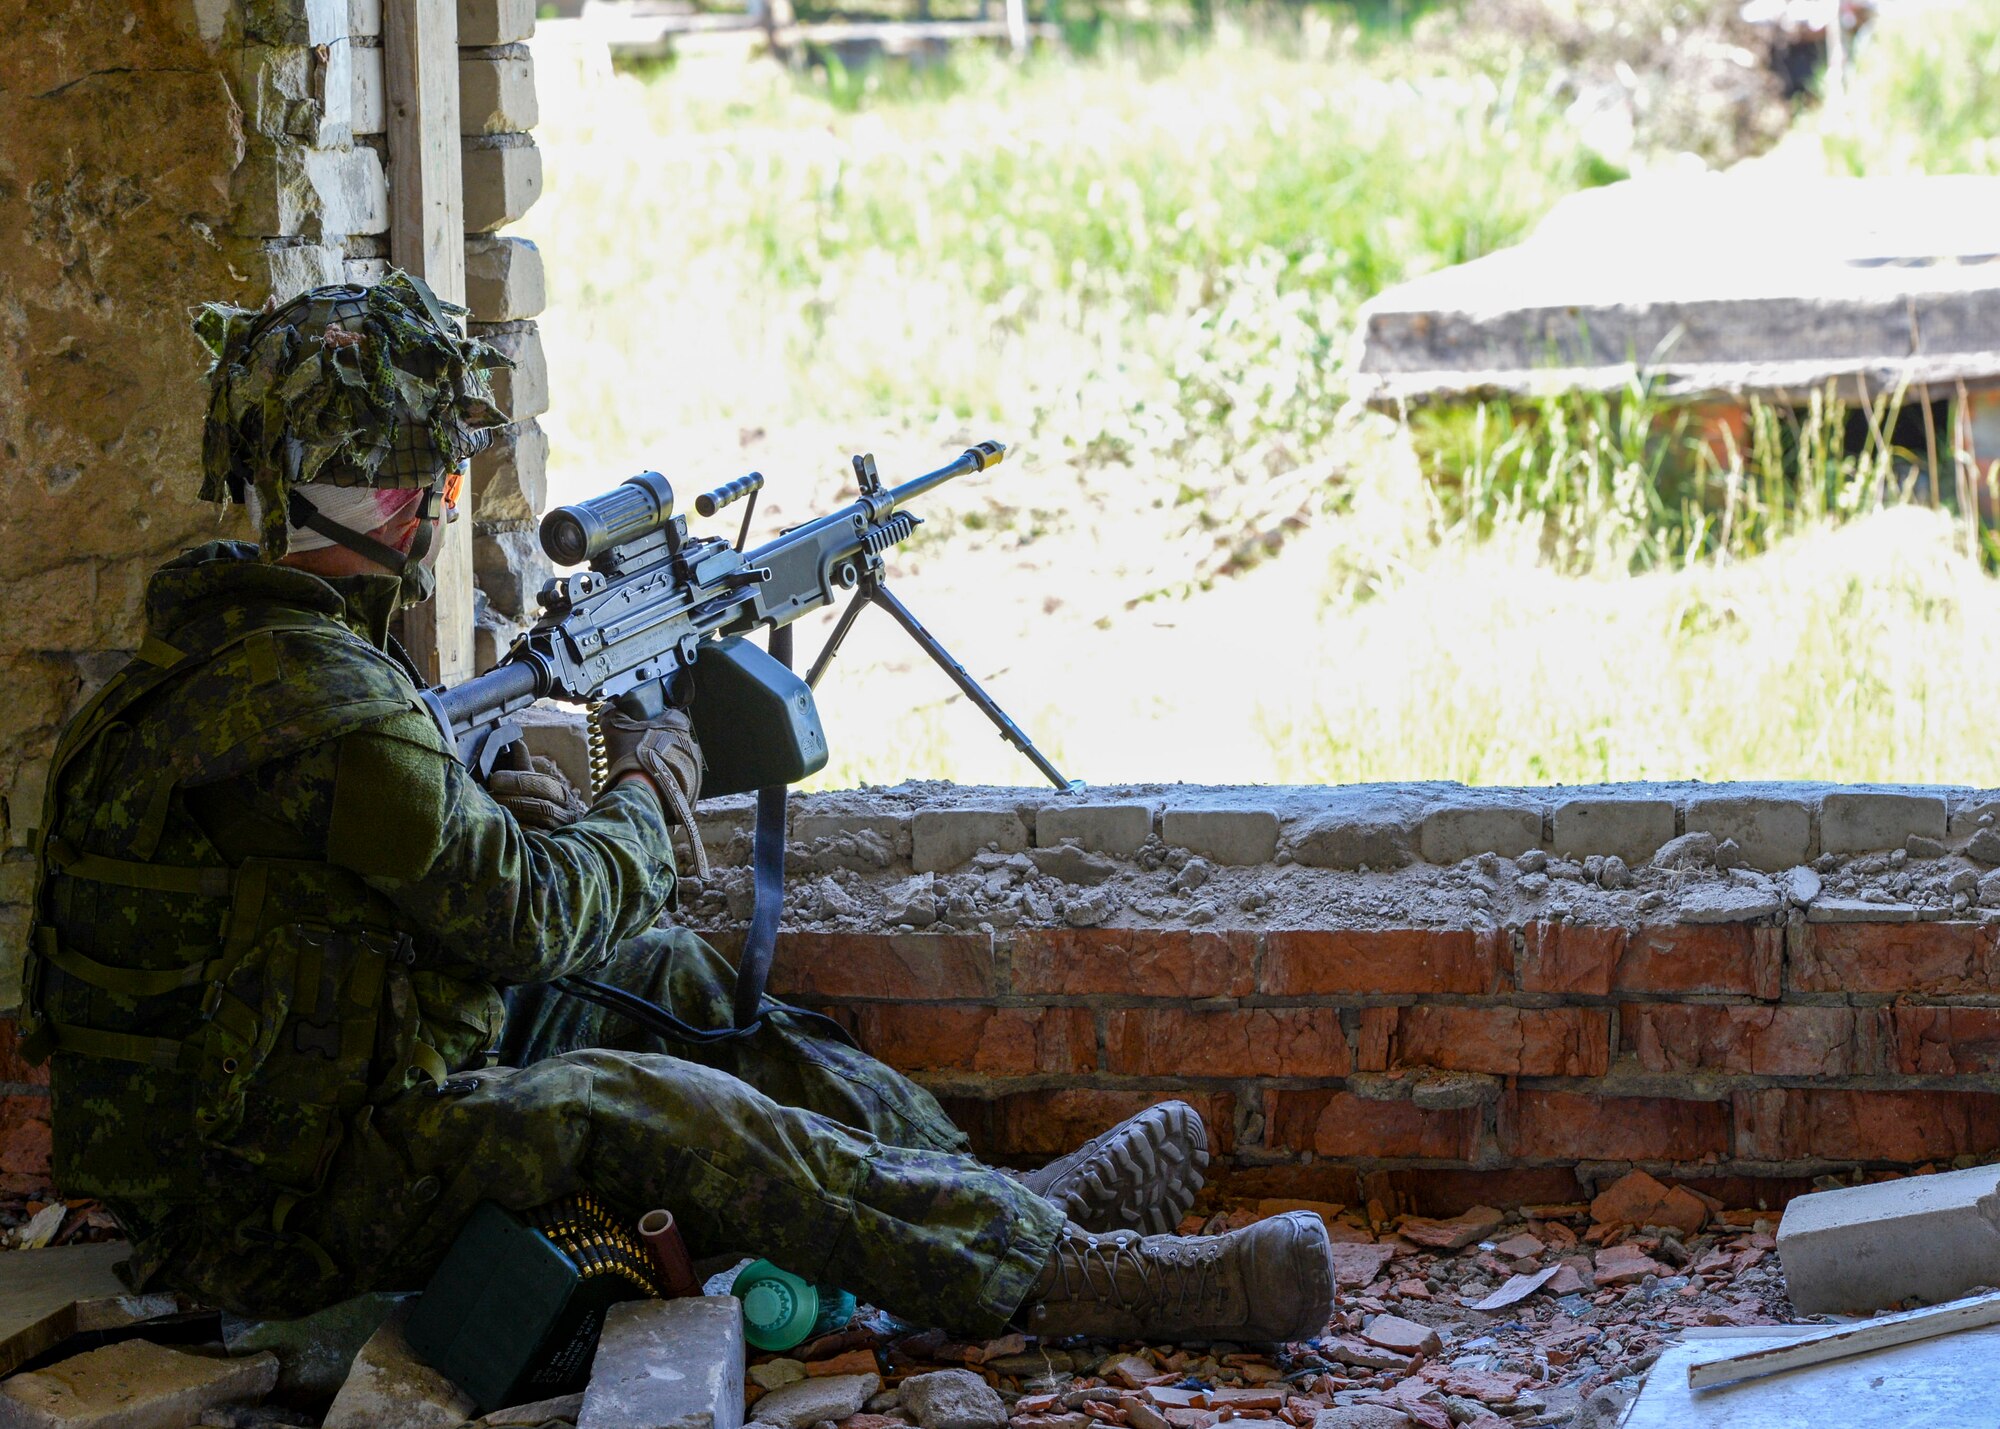 A member of the Canadian military waits for opposing forces to move during an exercise in Skrunda, Latvia on June 13, 2018. Canadian forces were teamed with Spanish, Italian, and Latvian platoons to act as a defending force during a battle simulation for Saber Strike 18. One of Saber Strike’s major focuses is to build strong and strategic partnerships. (U.S. Air Force photo by Staff Sgt. Jimmie D. Pike)